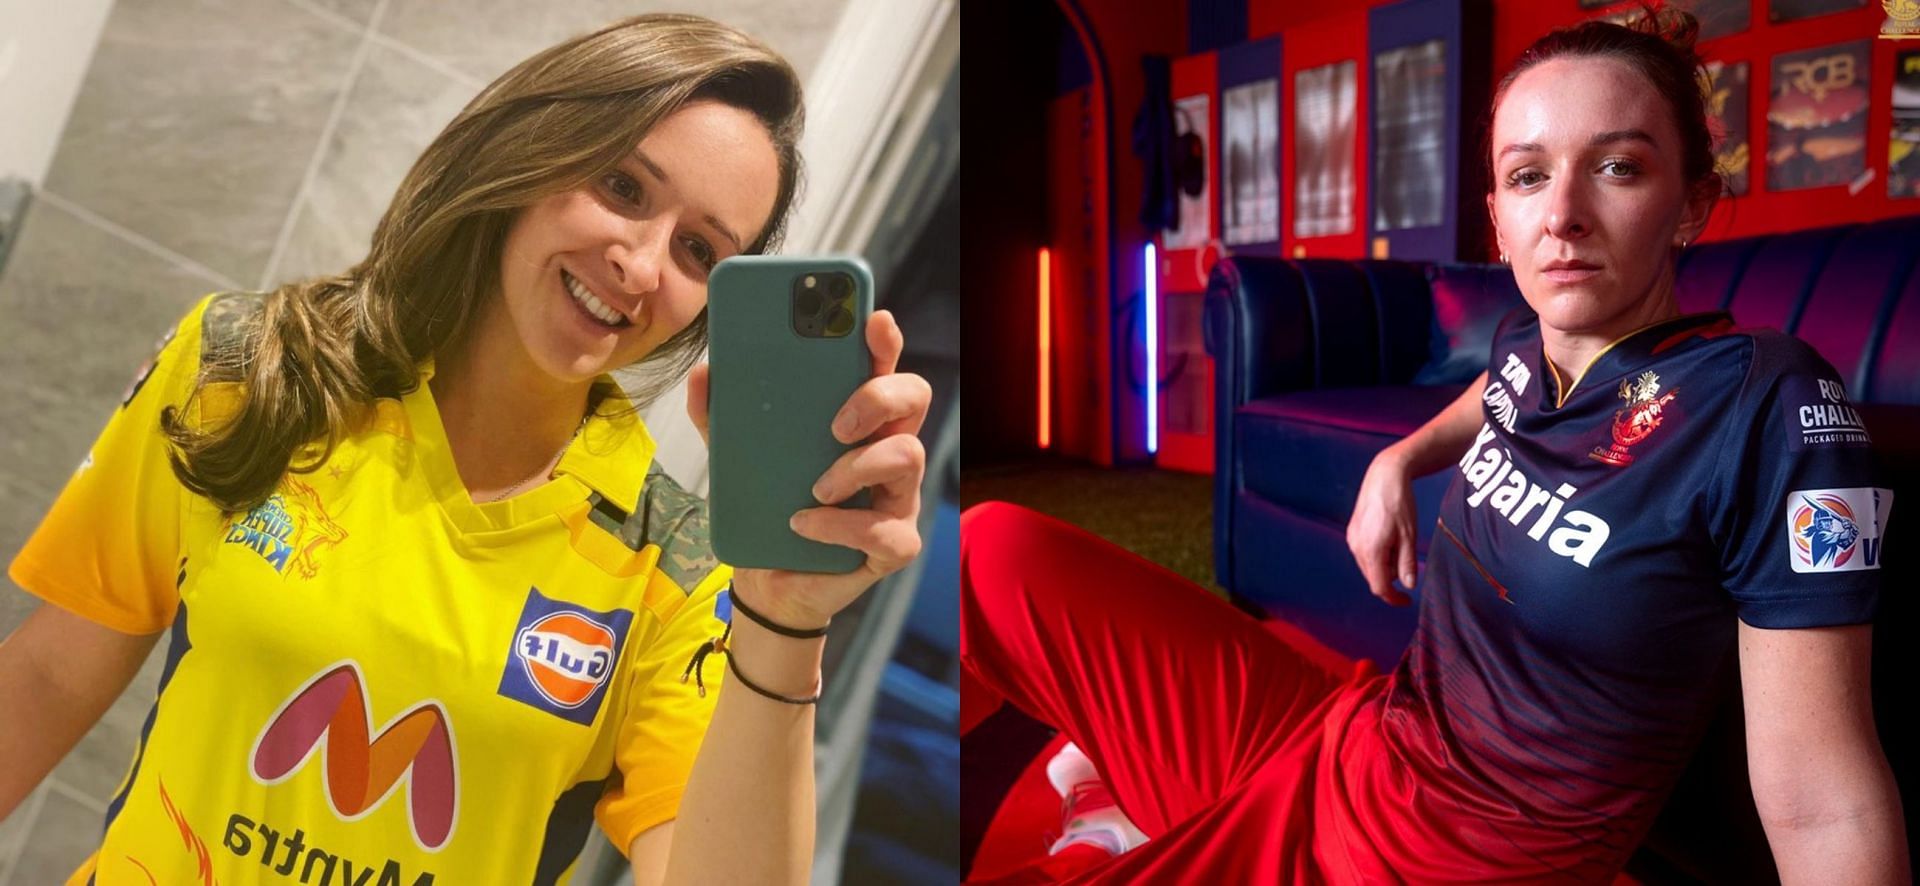 England pacer Kate Cross has once again proved her love for CSK with her reply to a fan